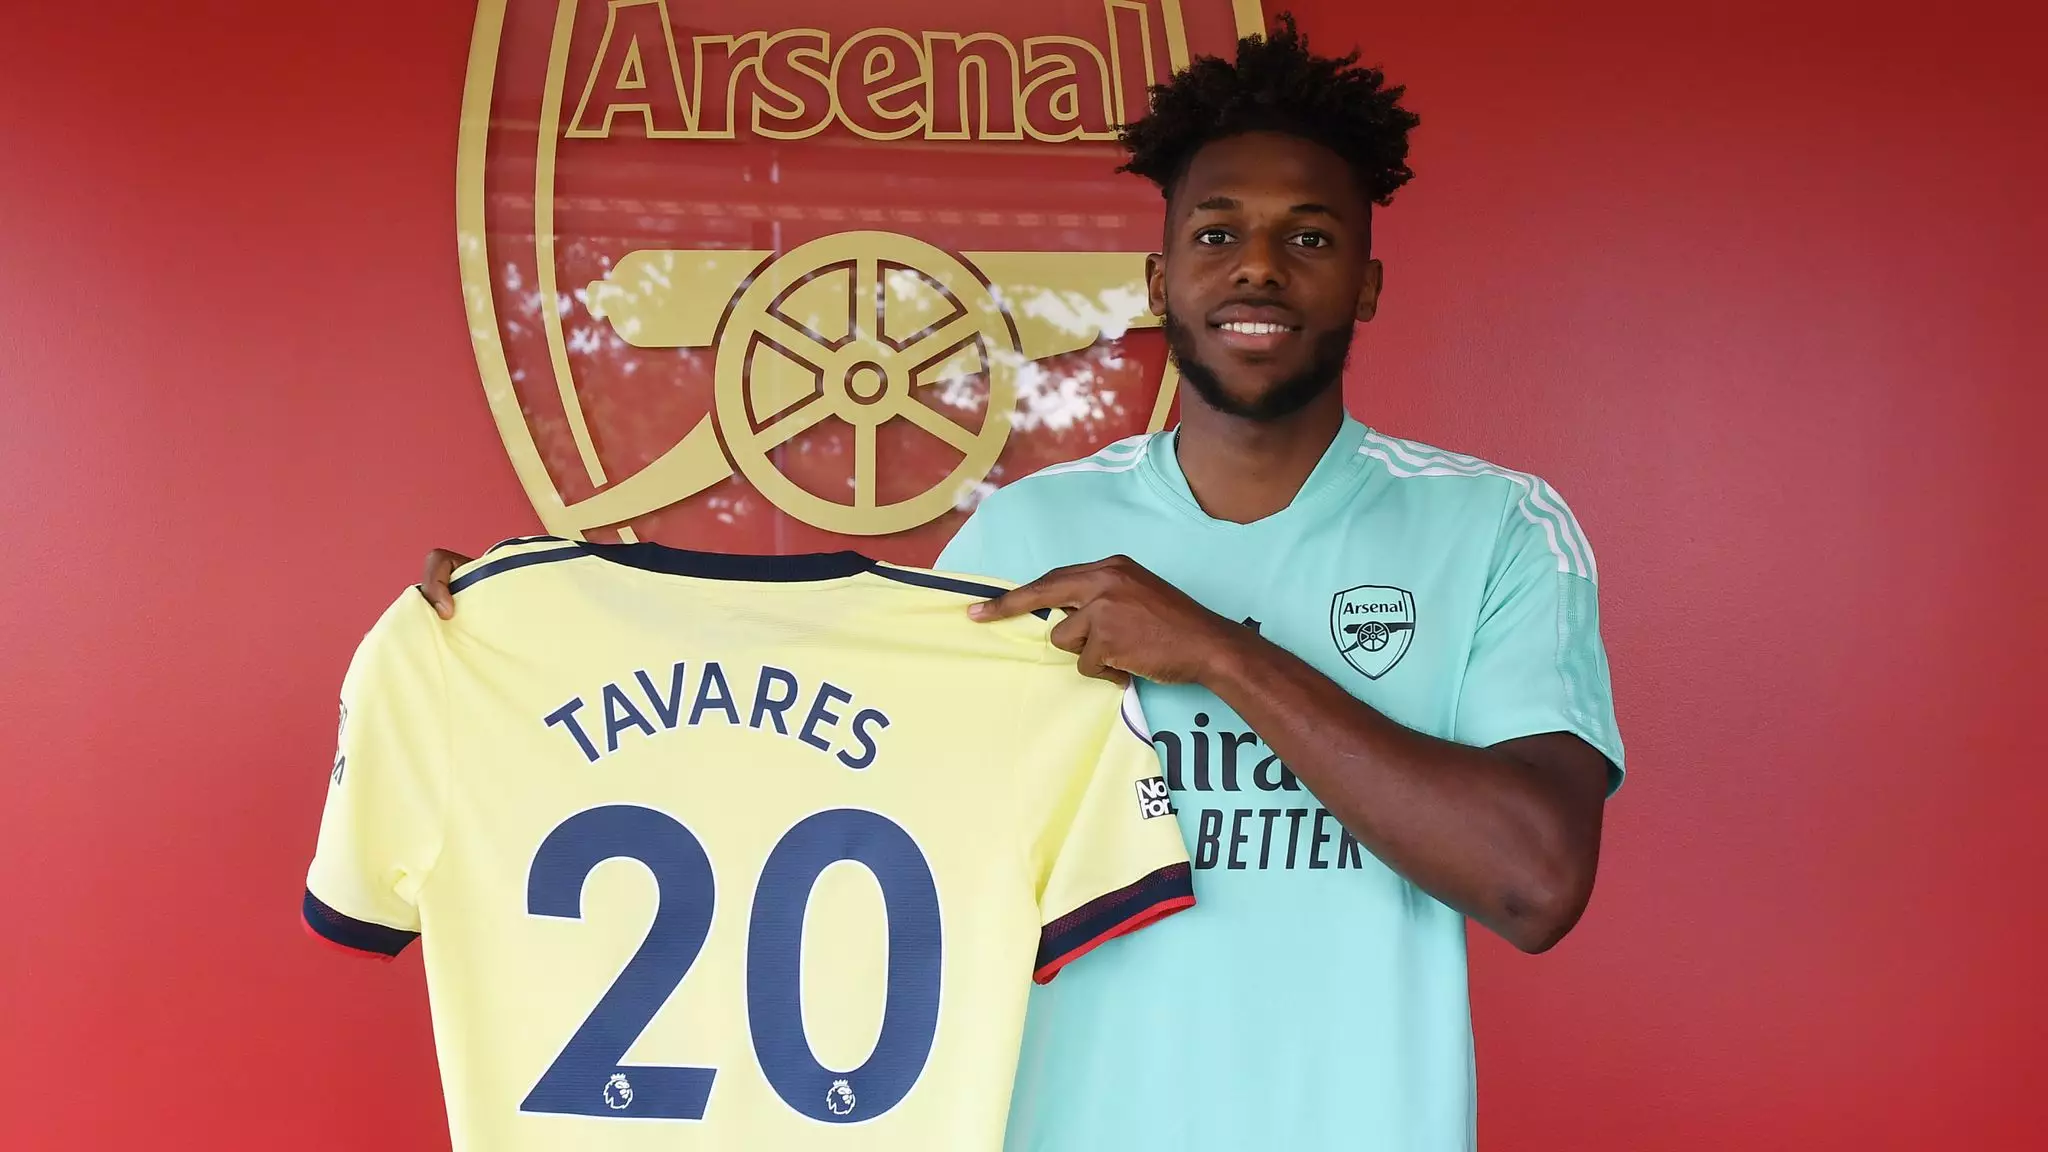 Nuno Tavares was Arsenal's first signing of the summer in a deal reportedly worth around £8m